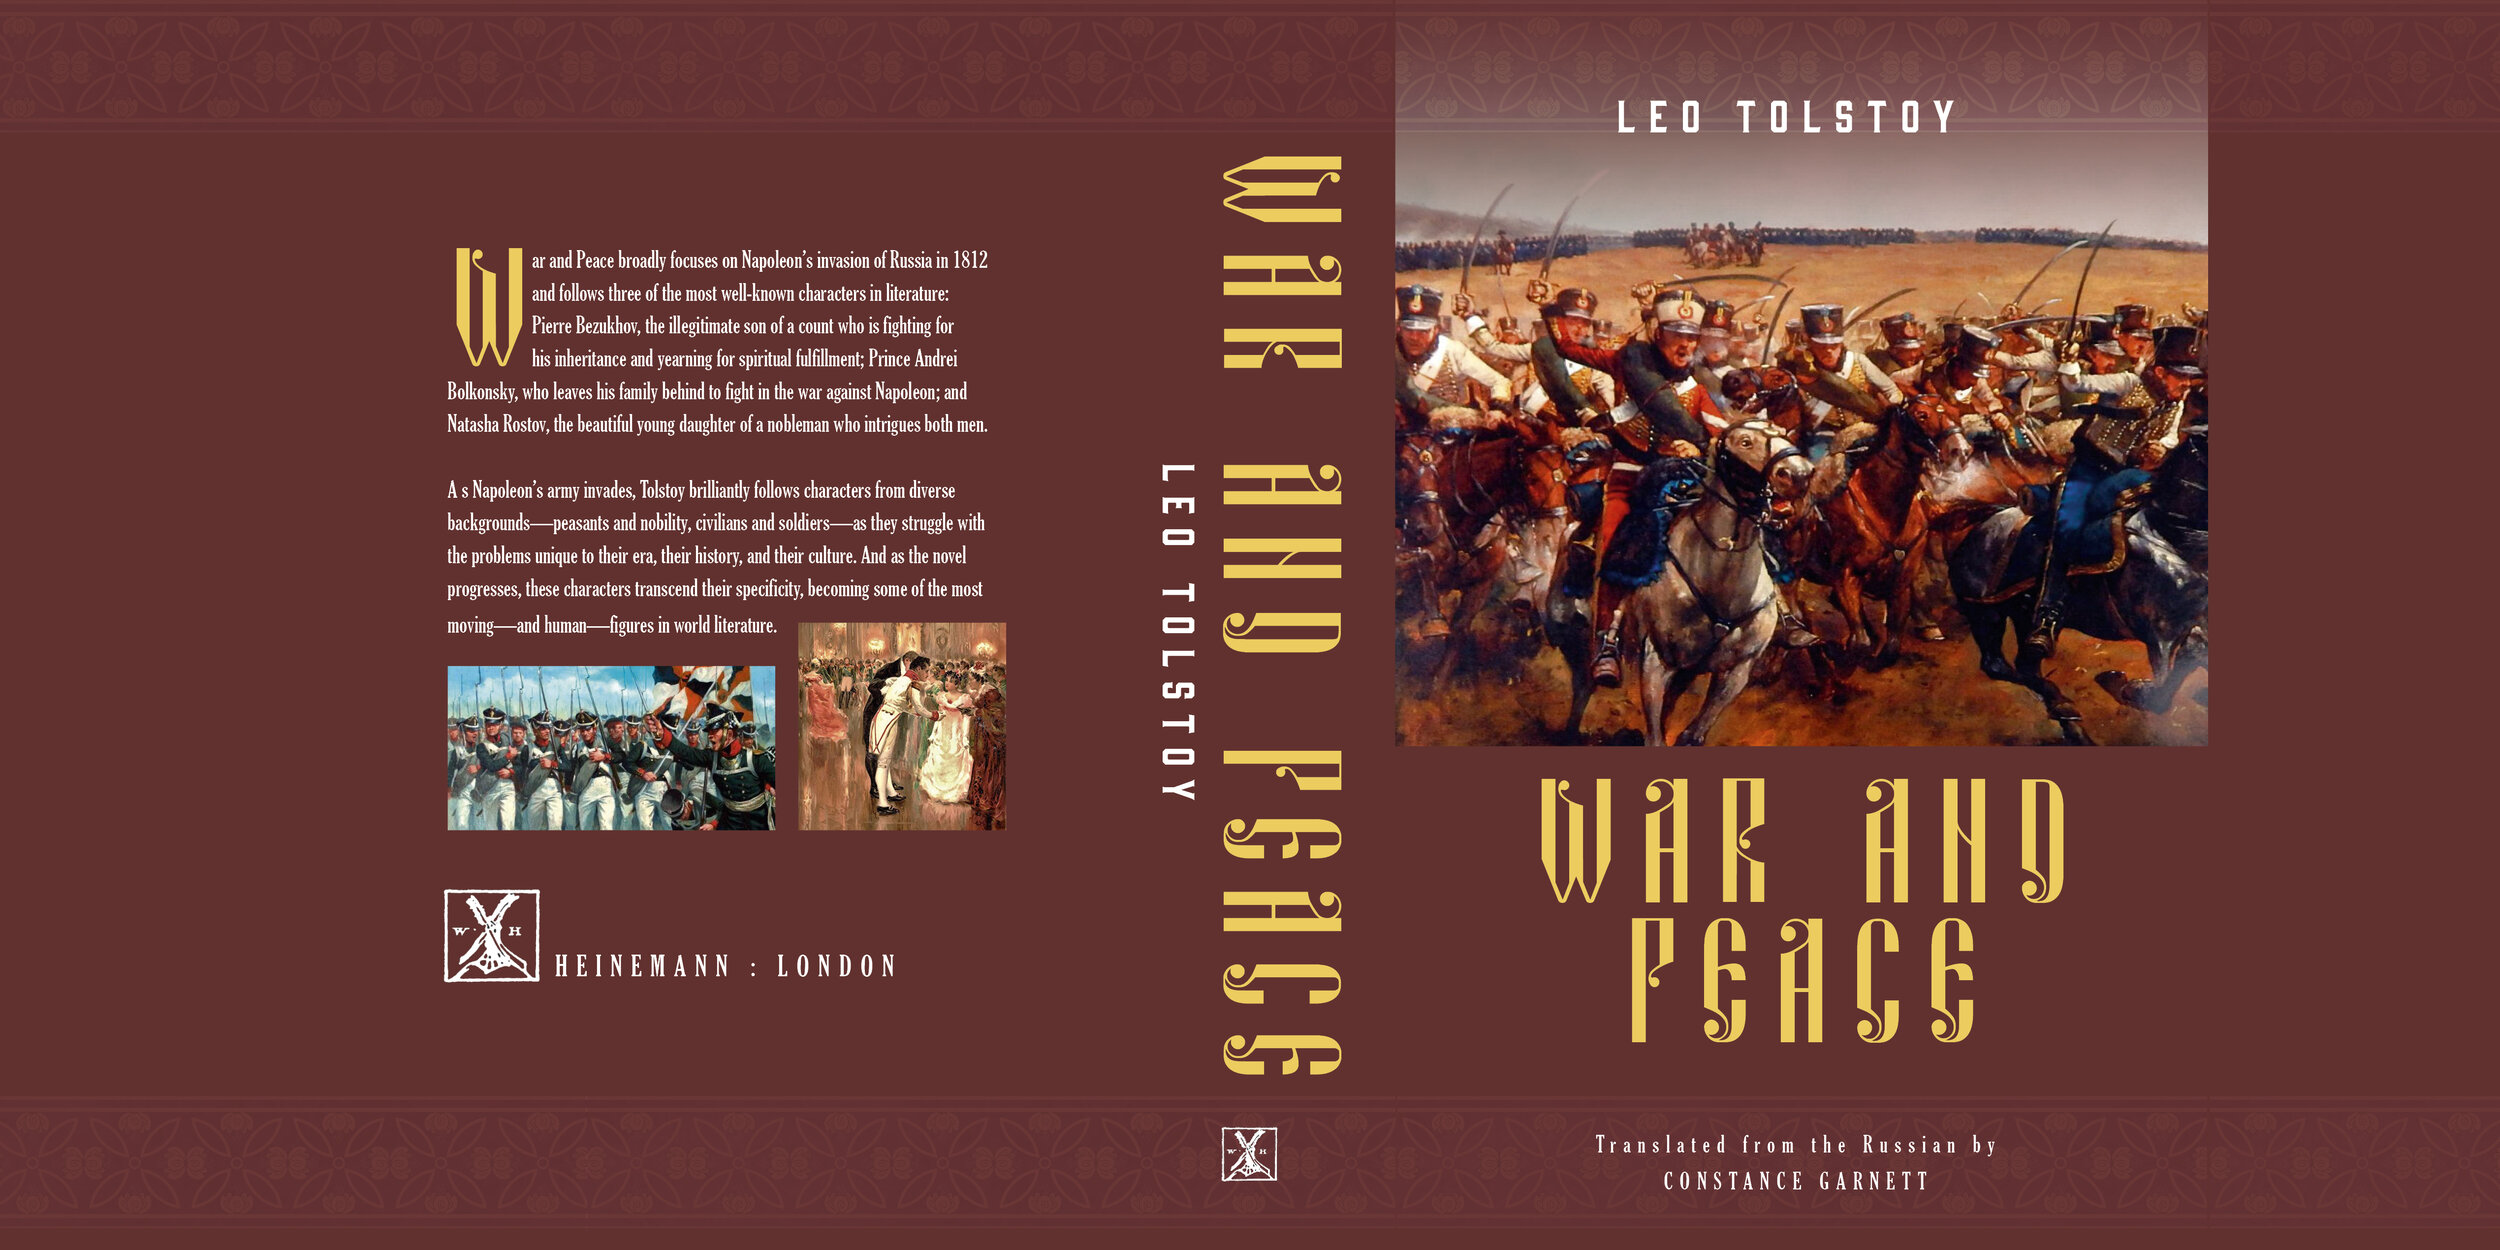 War and peace cover.jpg